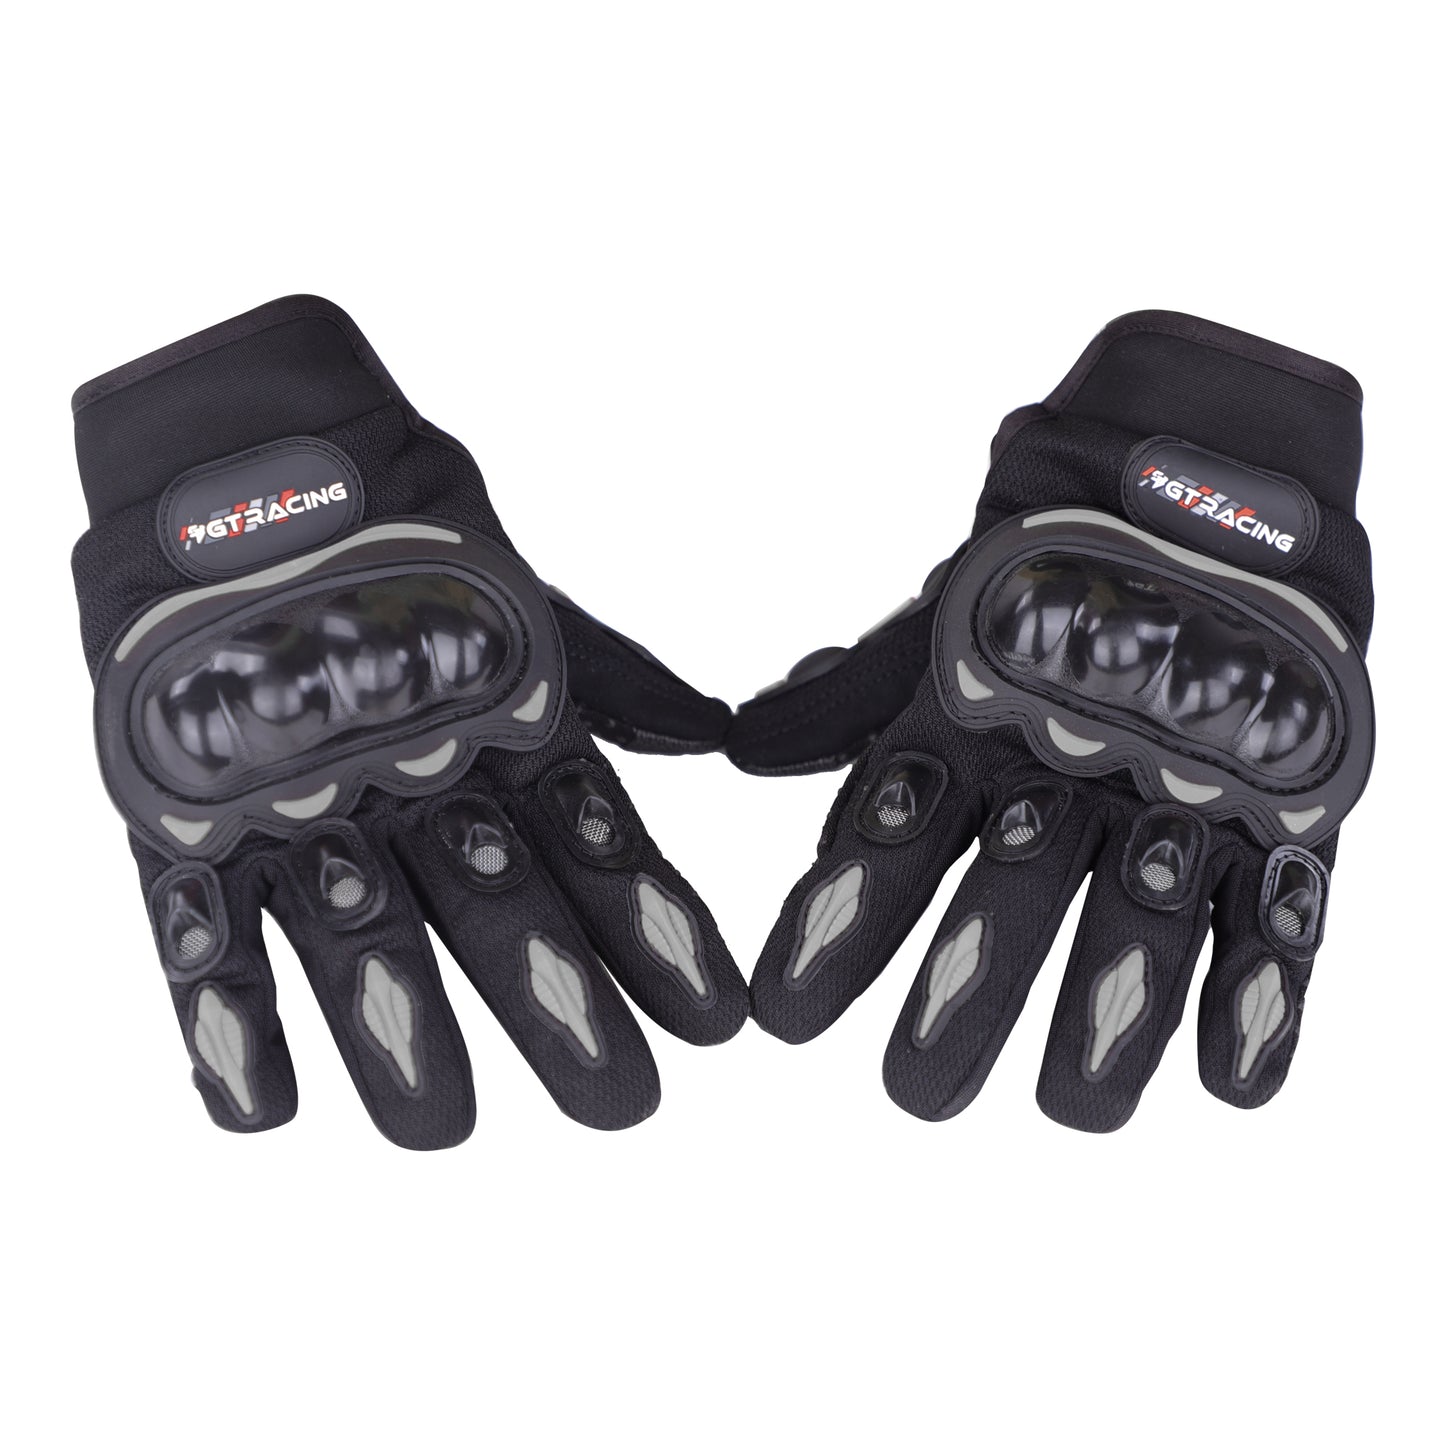 Steelbird GT-01 Full Finger Bike Riding Gloves with Touch Screen Sensitivity at Thumb and Index Finger, Protective Off-Road Motorbike Racing (Black)